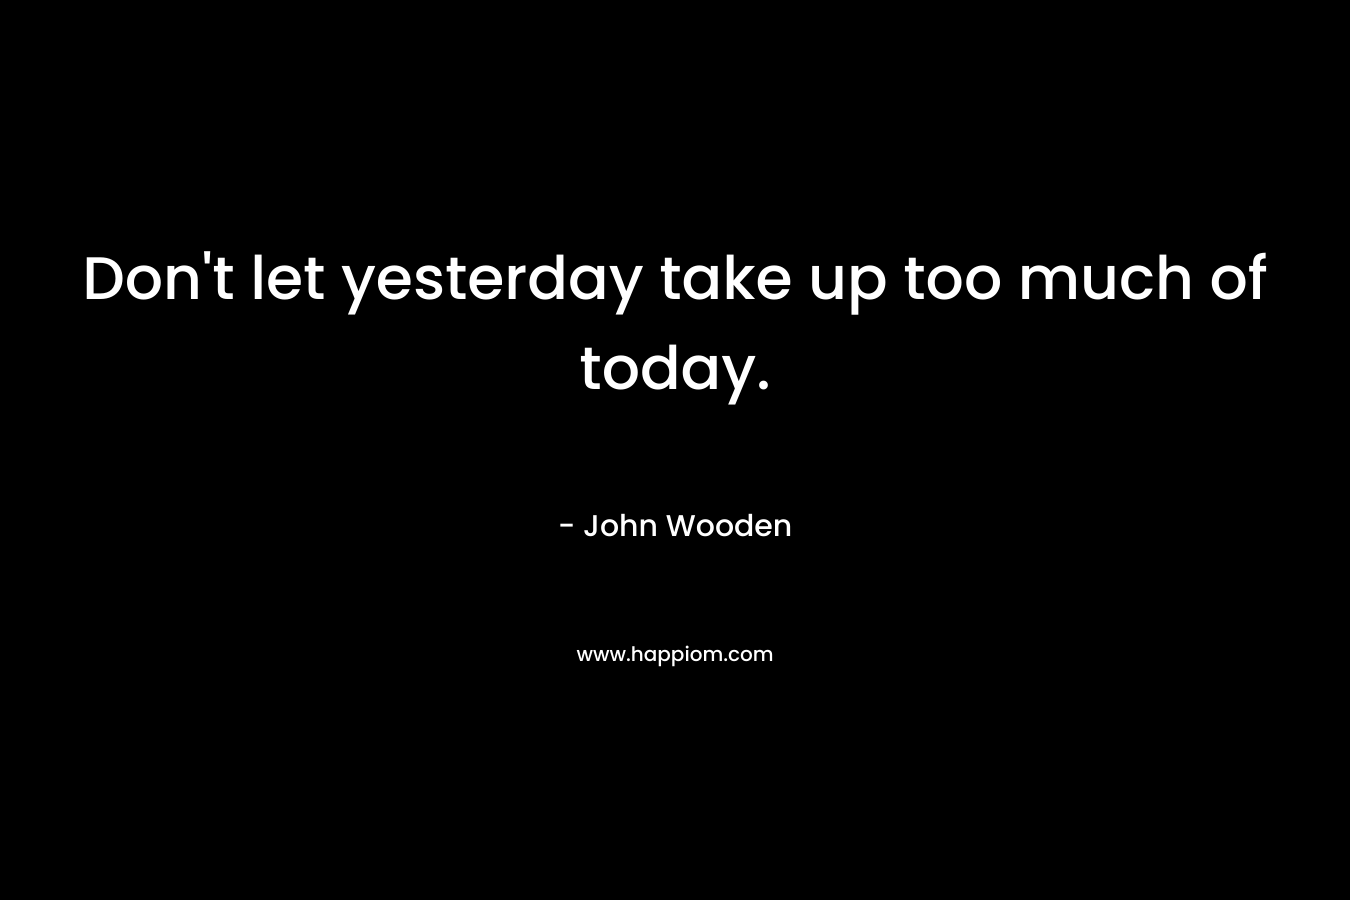 Don’t let yesterday take up too much of today. – John Wooden